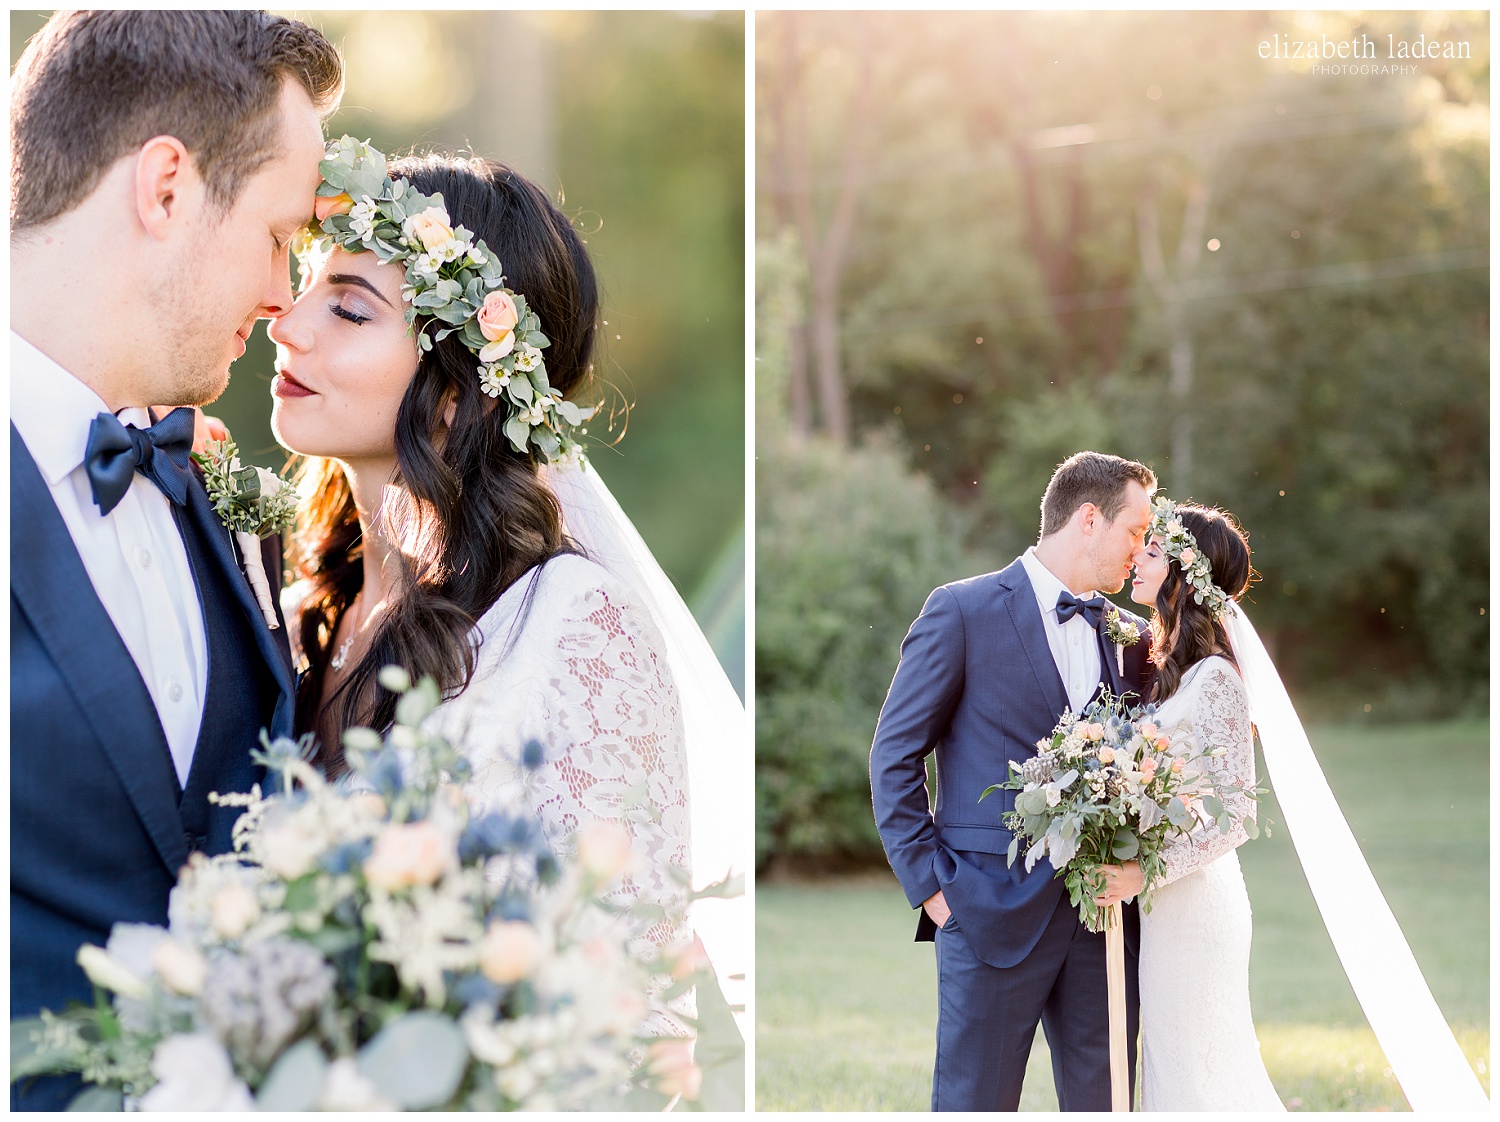 Willow-Creek-Blush-and-Blues-Outdoor-Wedding-Photography-S+Z2018-elizabeth-ladean-photography-photo_0598.jpg